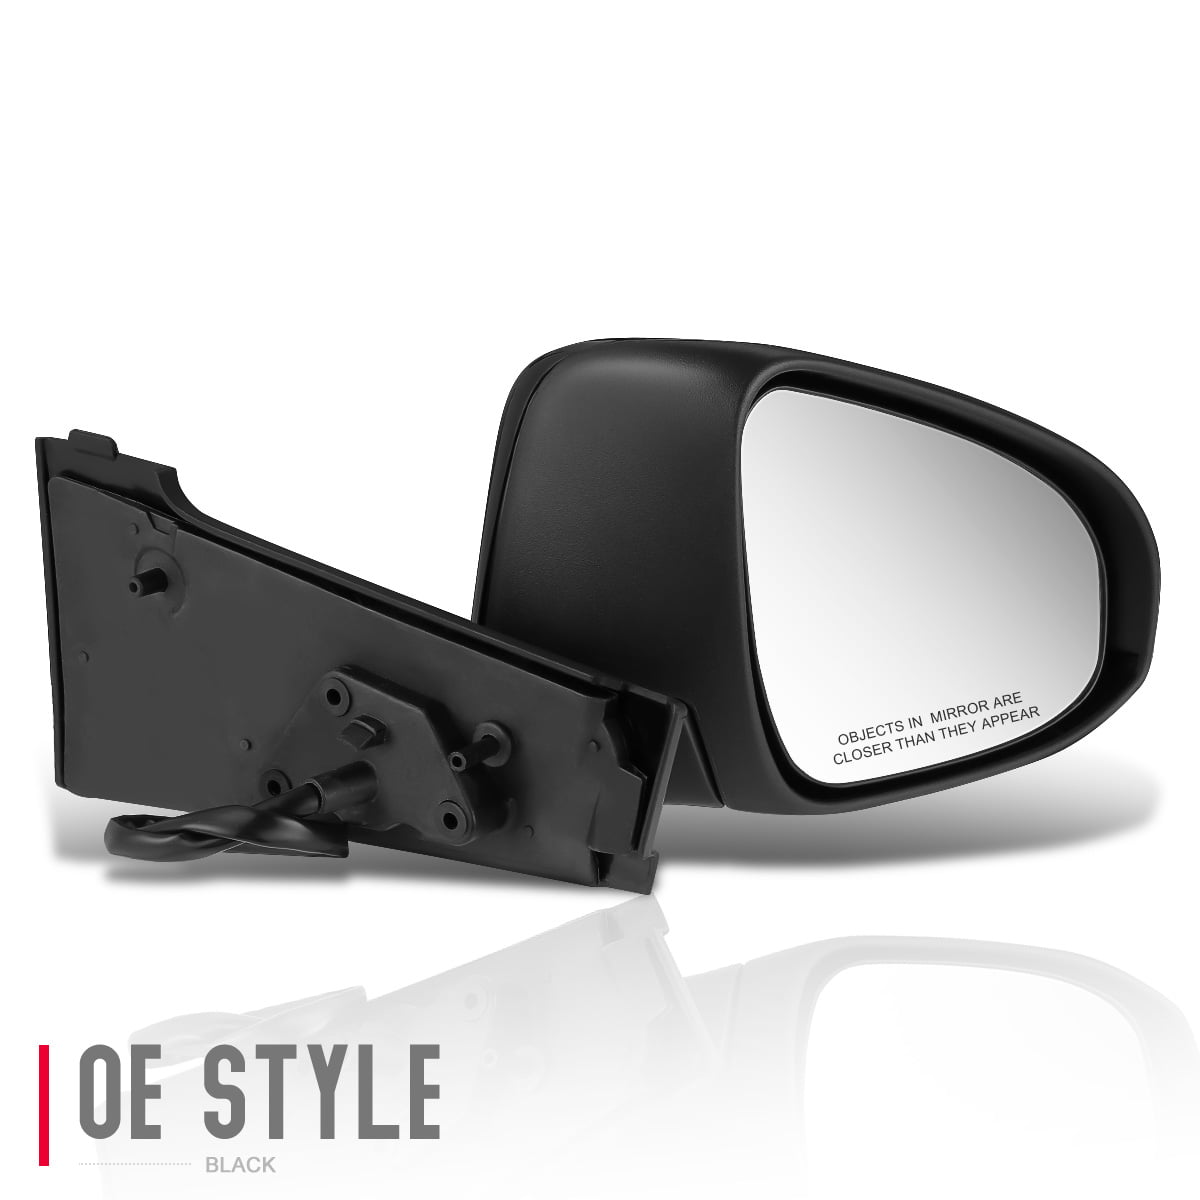 DNA Motoring OEM-MR-TO1321232 Factory Style Manual Right Side Door Mirror 